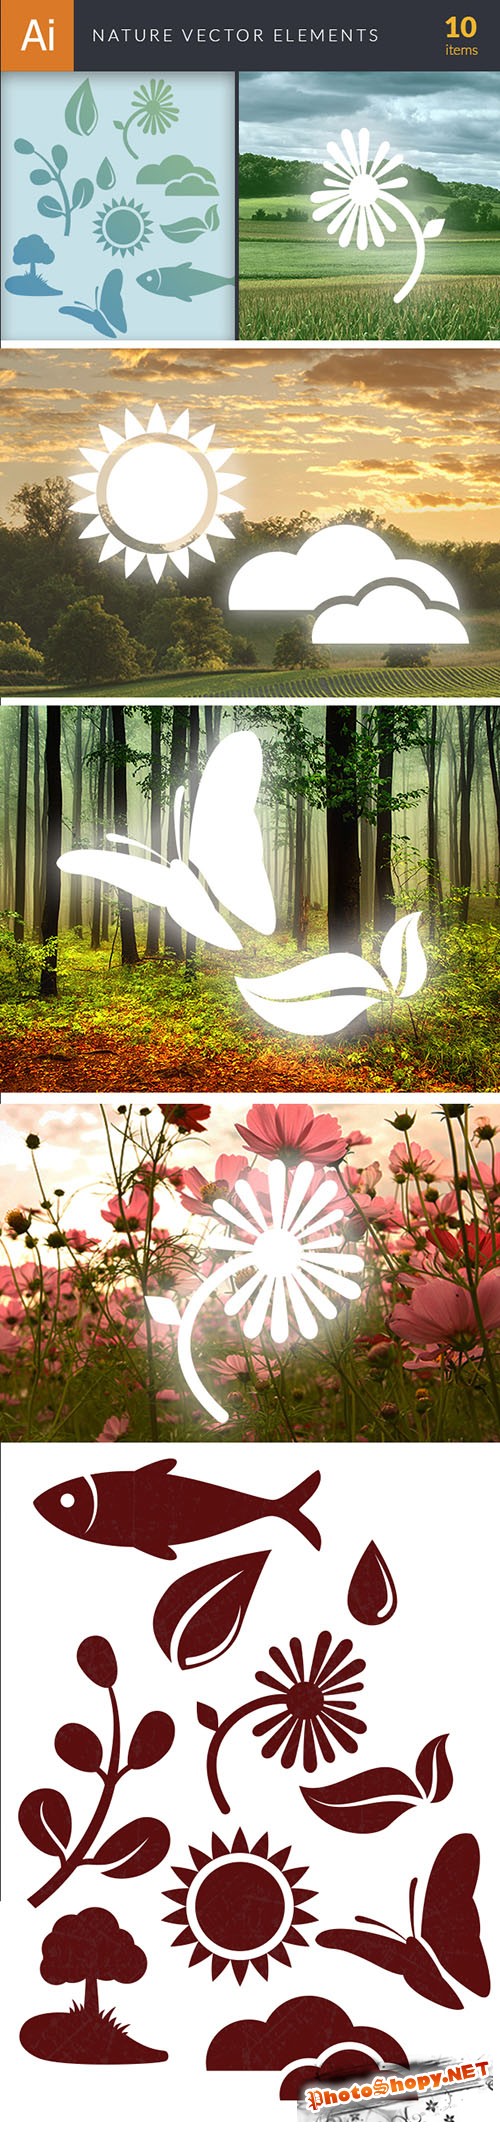 Simple Nature Vector Illustrations Pack 1